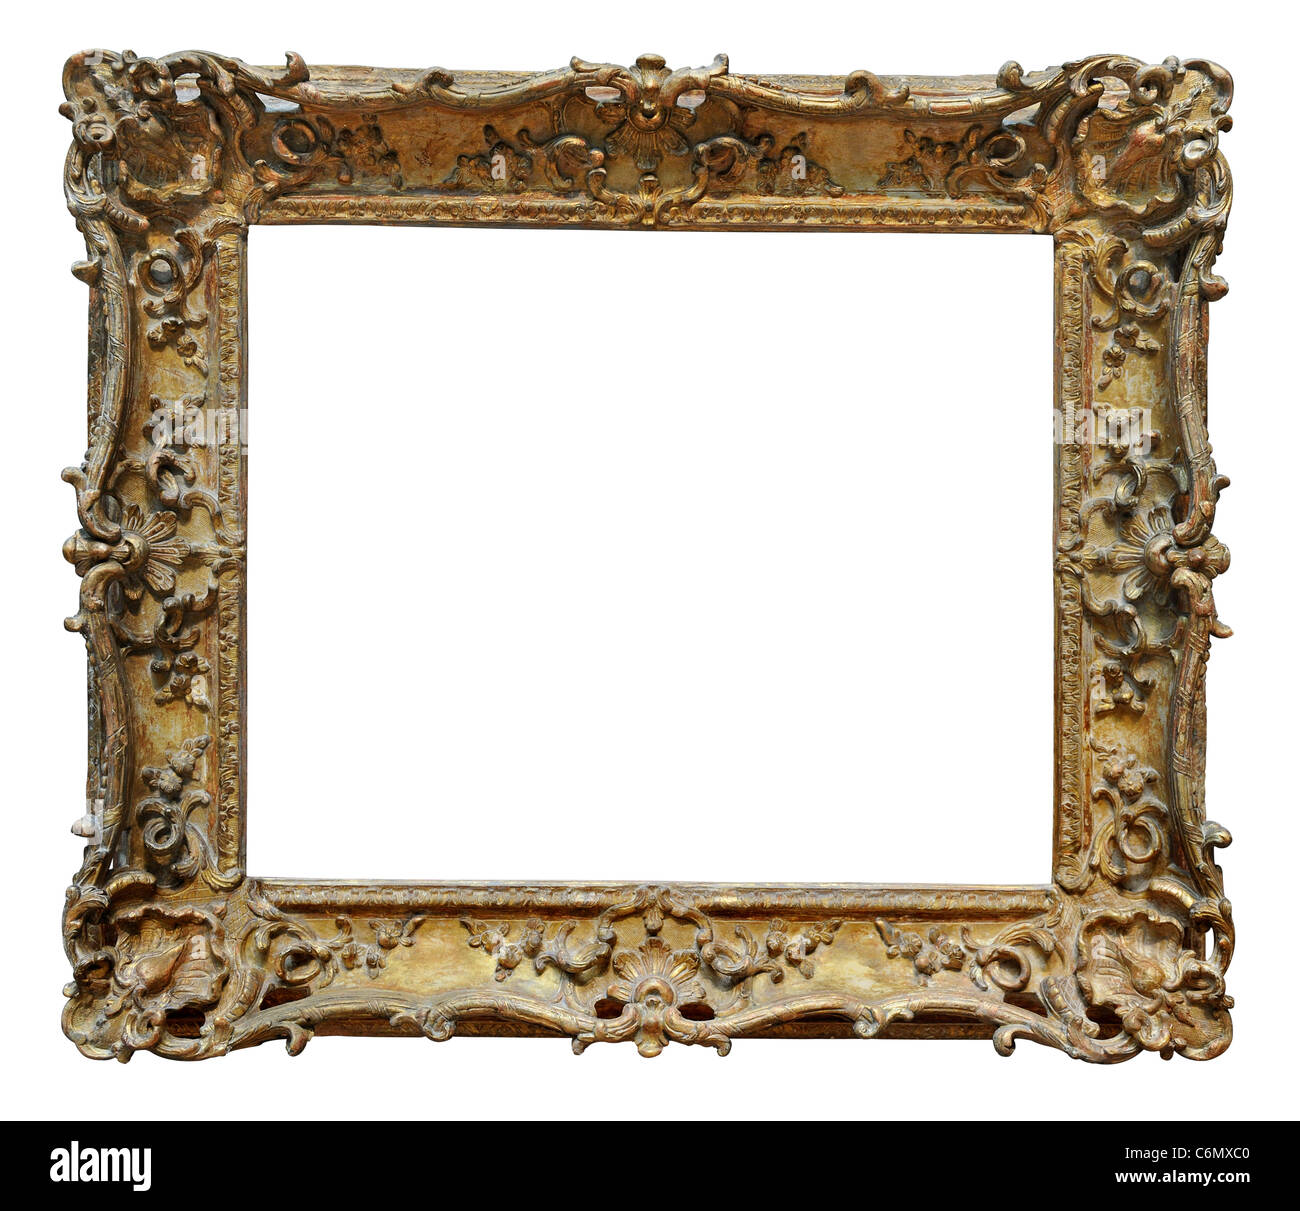 VIntage gold frame isolé sur fond blanc - With clipping path Banque D'Images